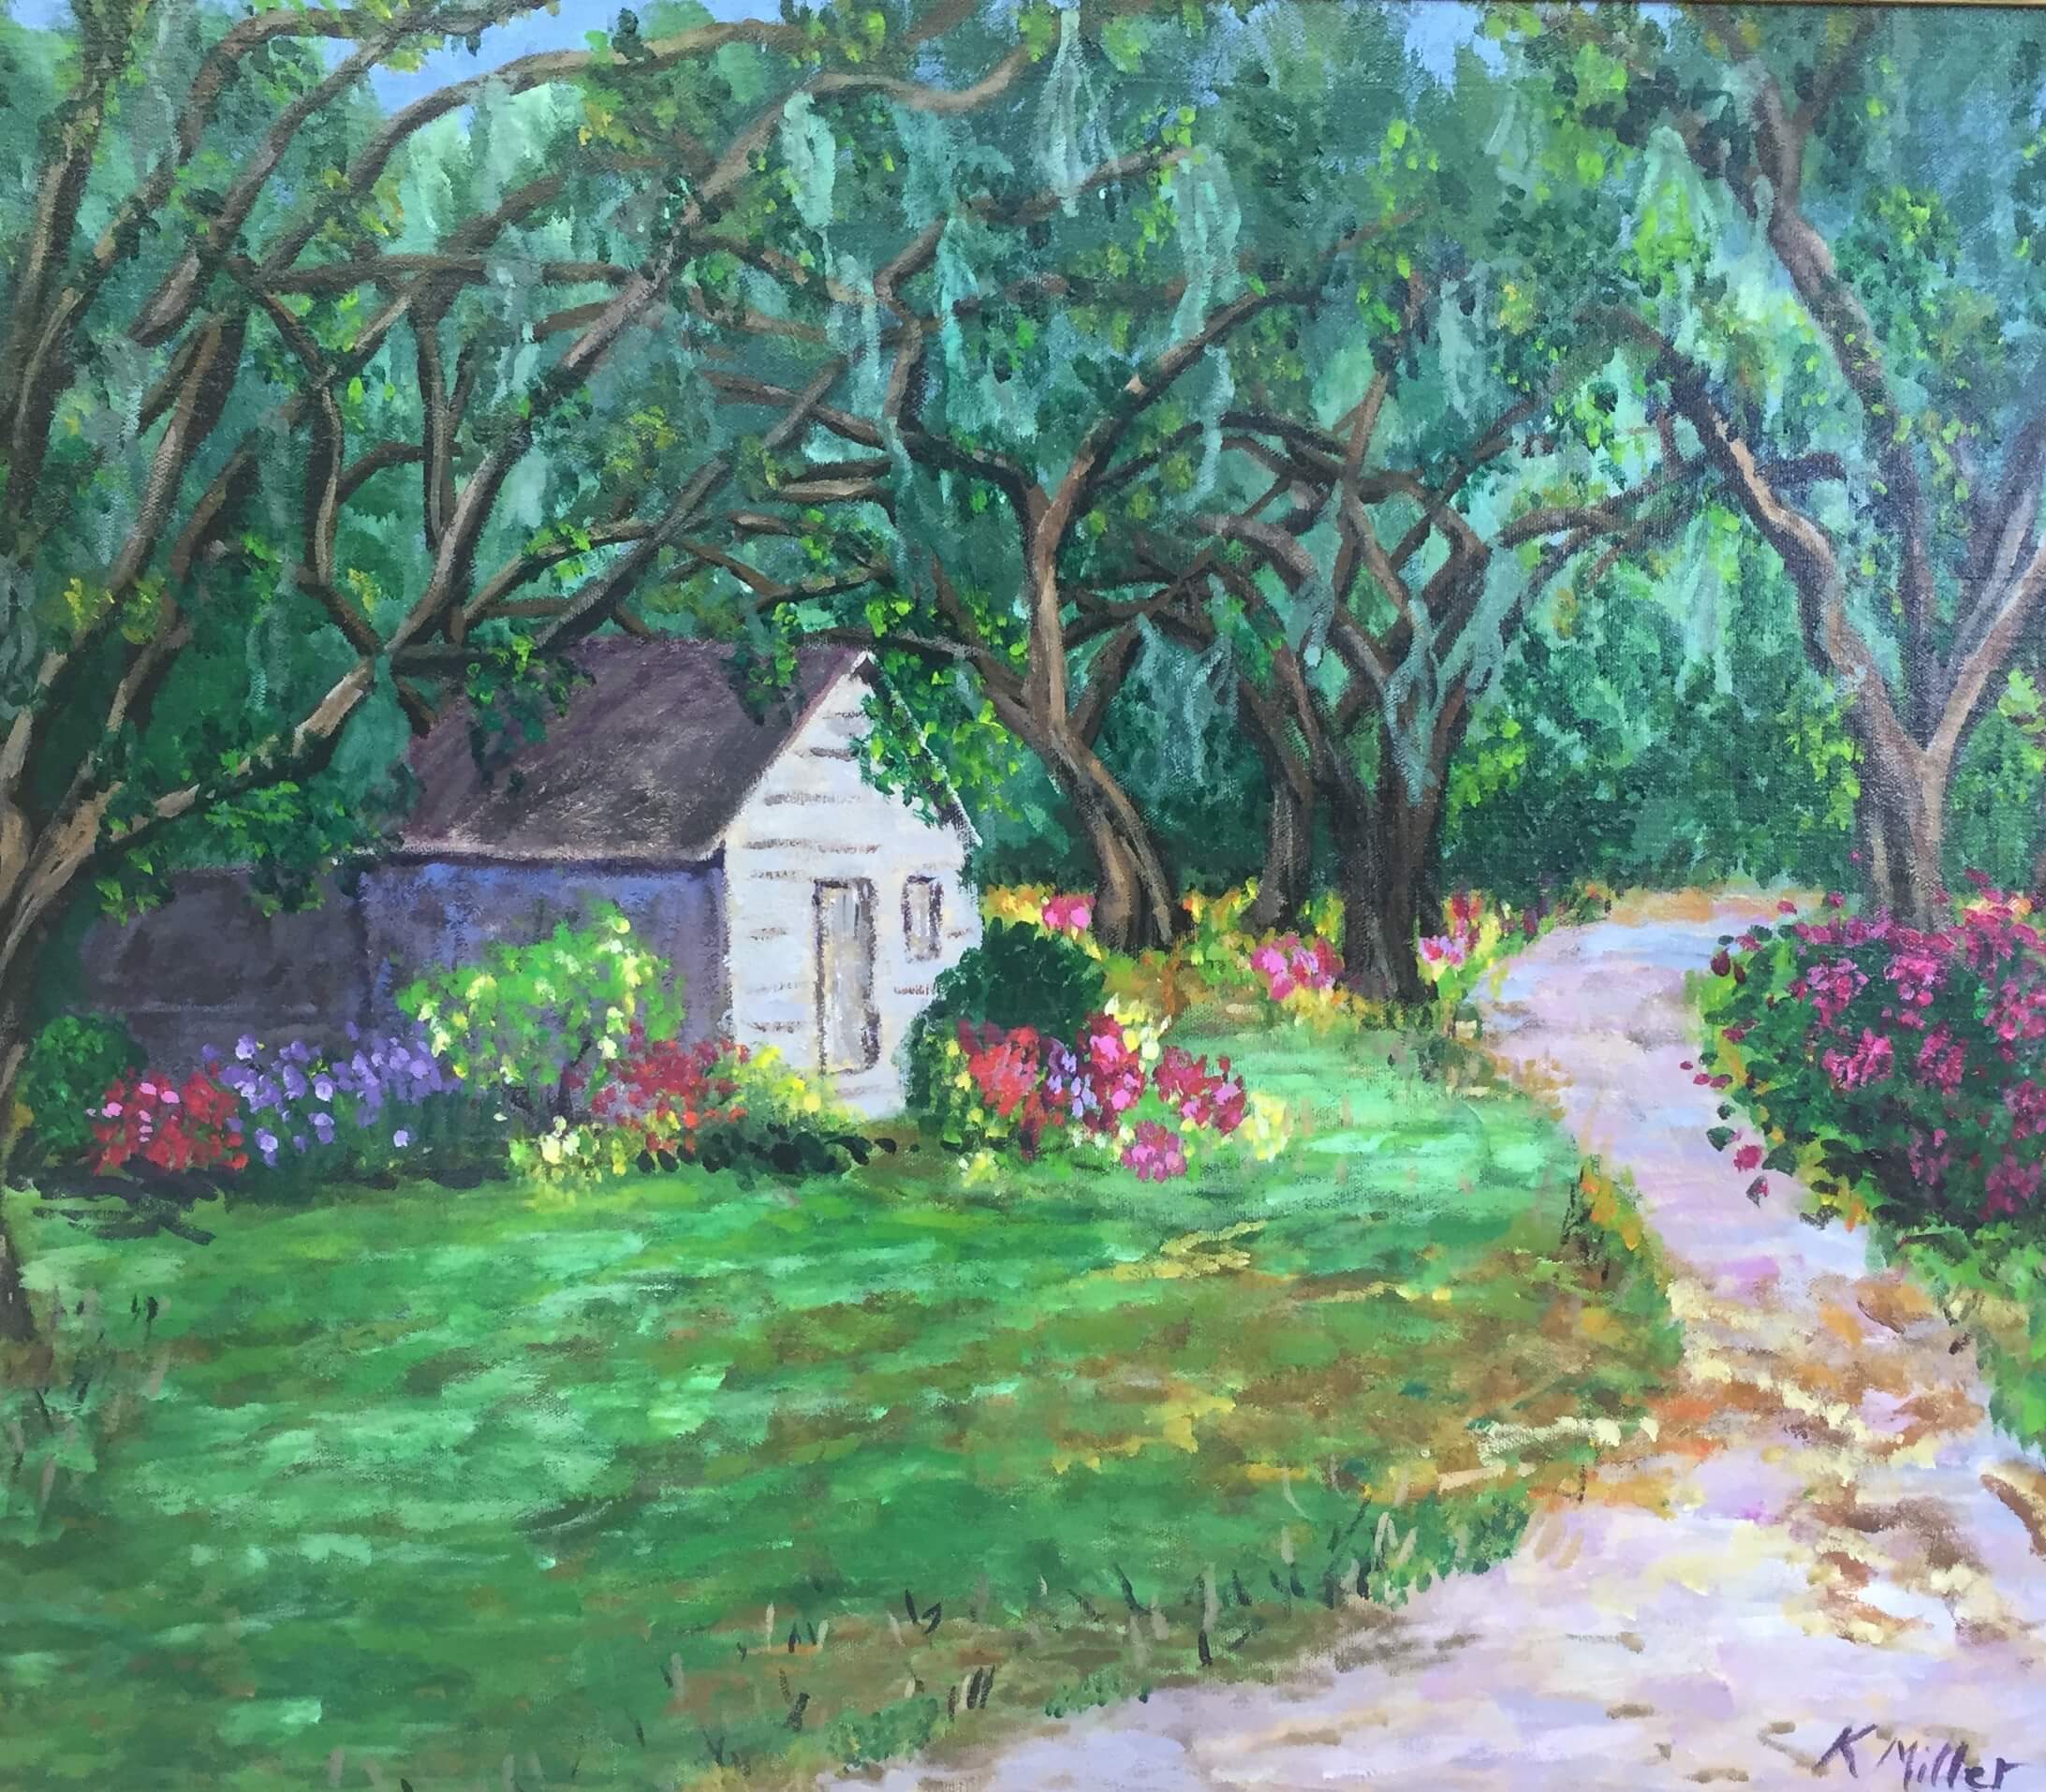 A Cabin In The Oaks 20" x 24" Acrylic on Canvas Original Painting by Kathy Miller